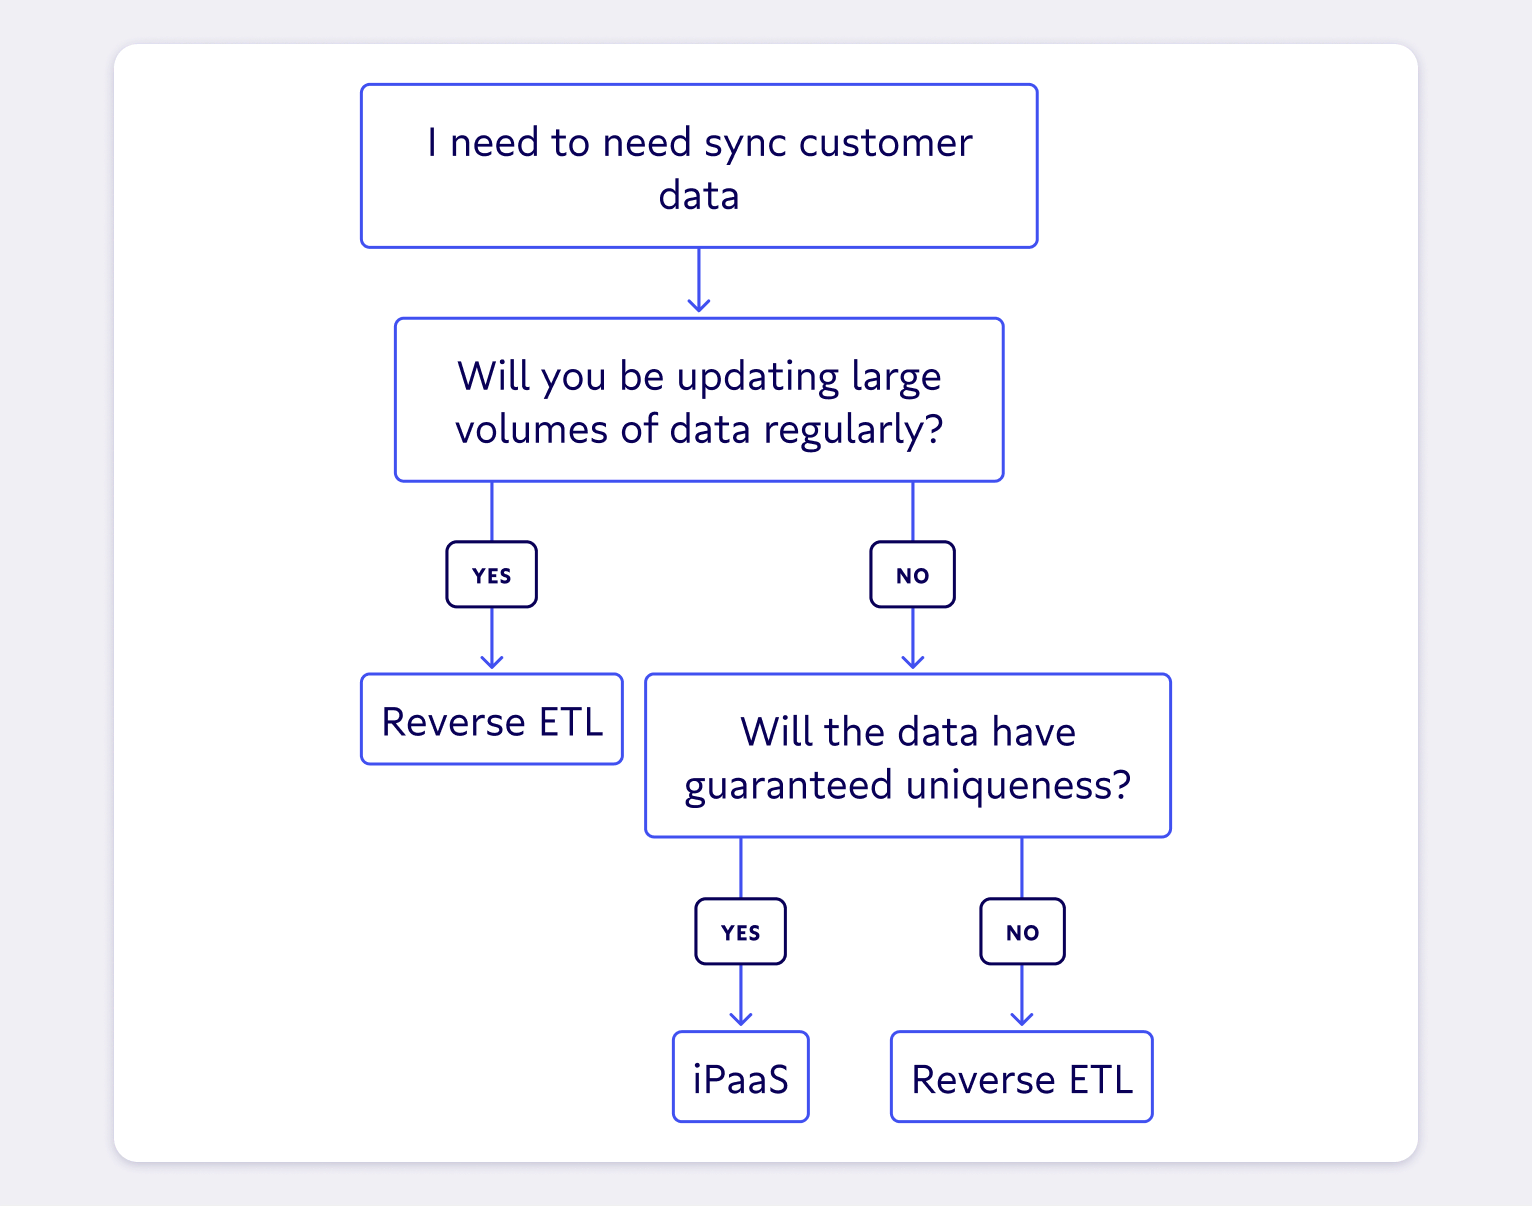 When deciding whether you should choose an iPaaS or Reverse ETL solution, consider this diagram.